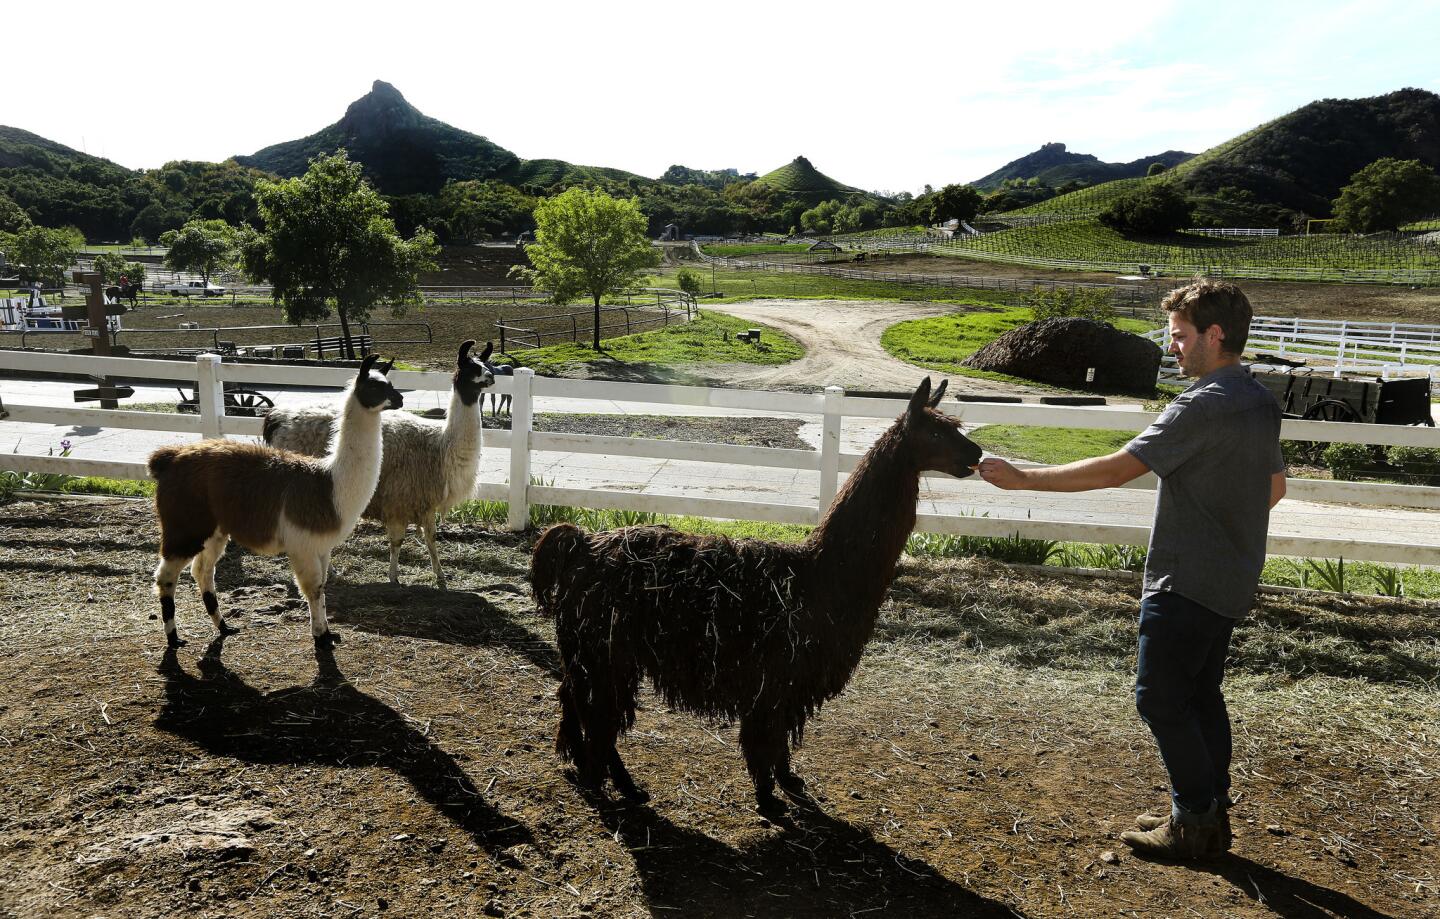 Dakota Semier, ranch manager at Malibu Family Wines, feeds an alpaca inside its pen at the ranch in Malibu on March 10. At left are a pair of llamas. Since last November, mountain lions have killed two llamas and an alpaca while inside the pen.